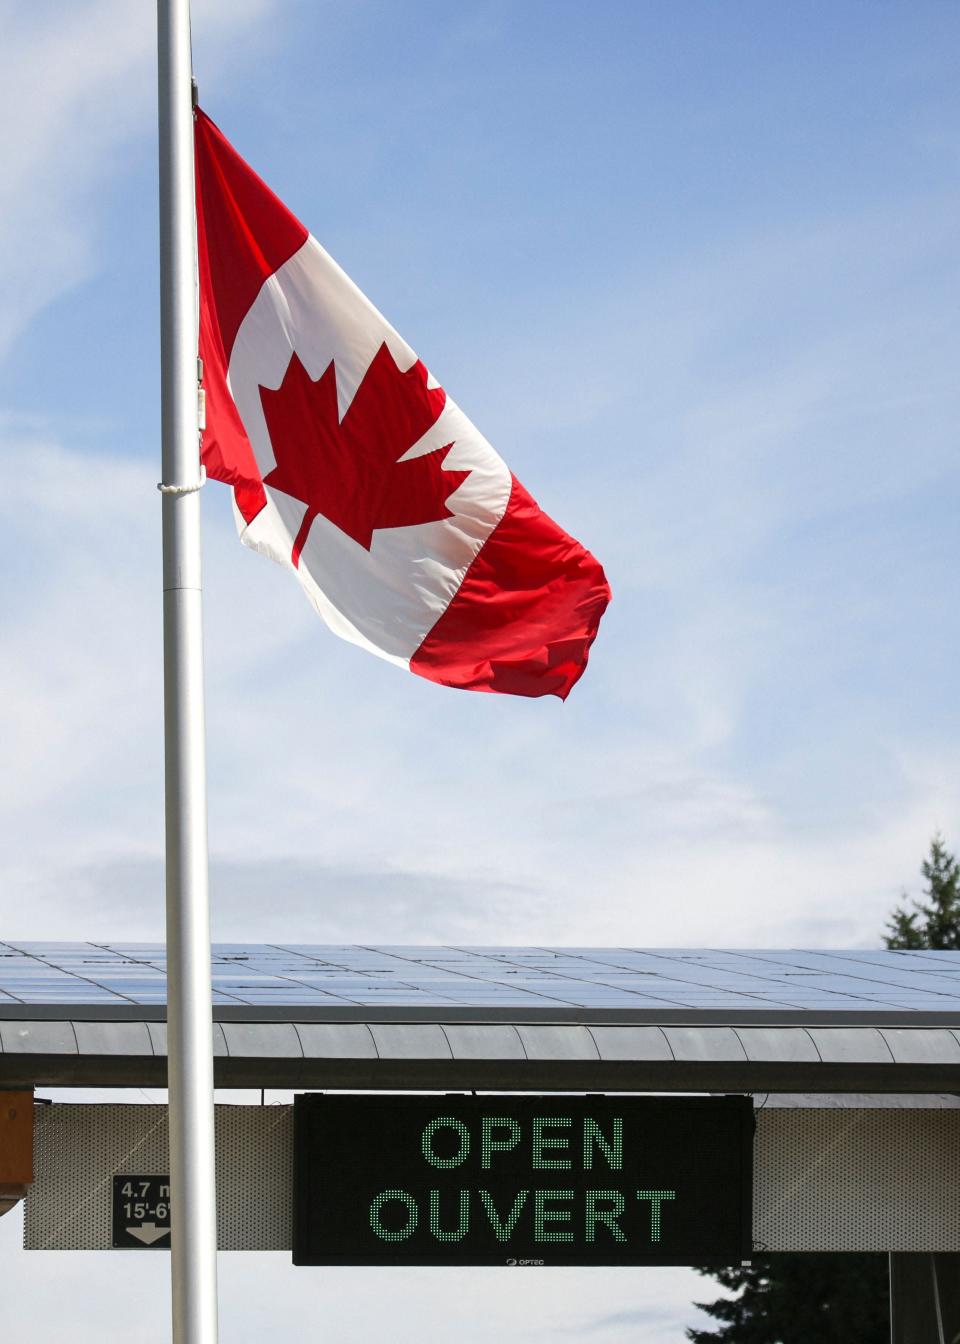 A Canadian national flag at a border crossing between the U.S. and Canada.